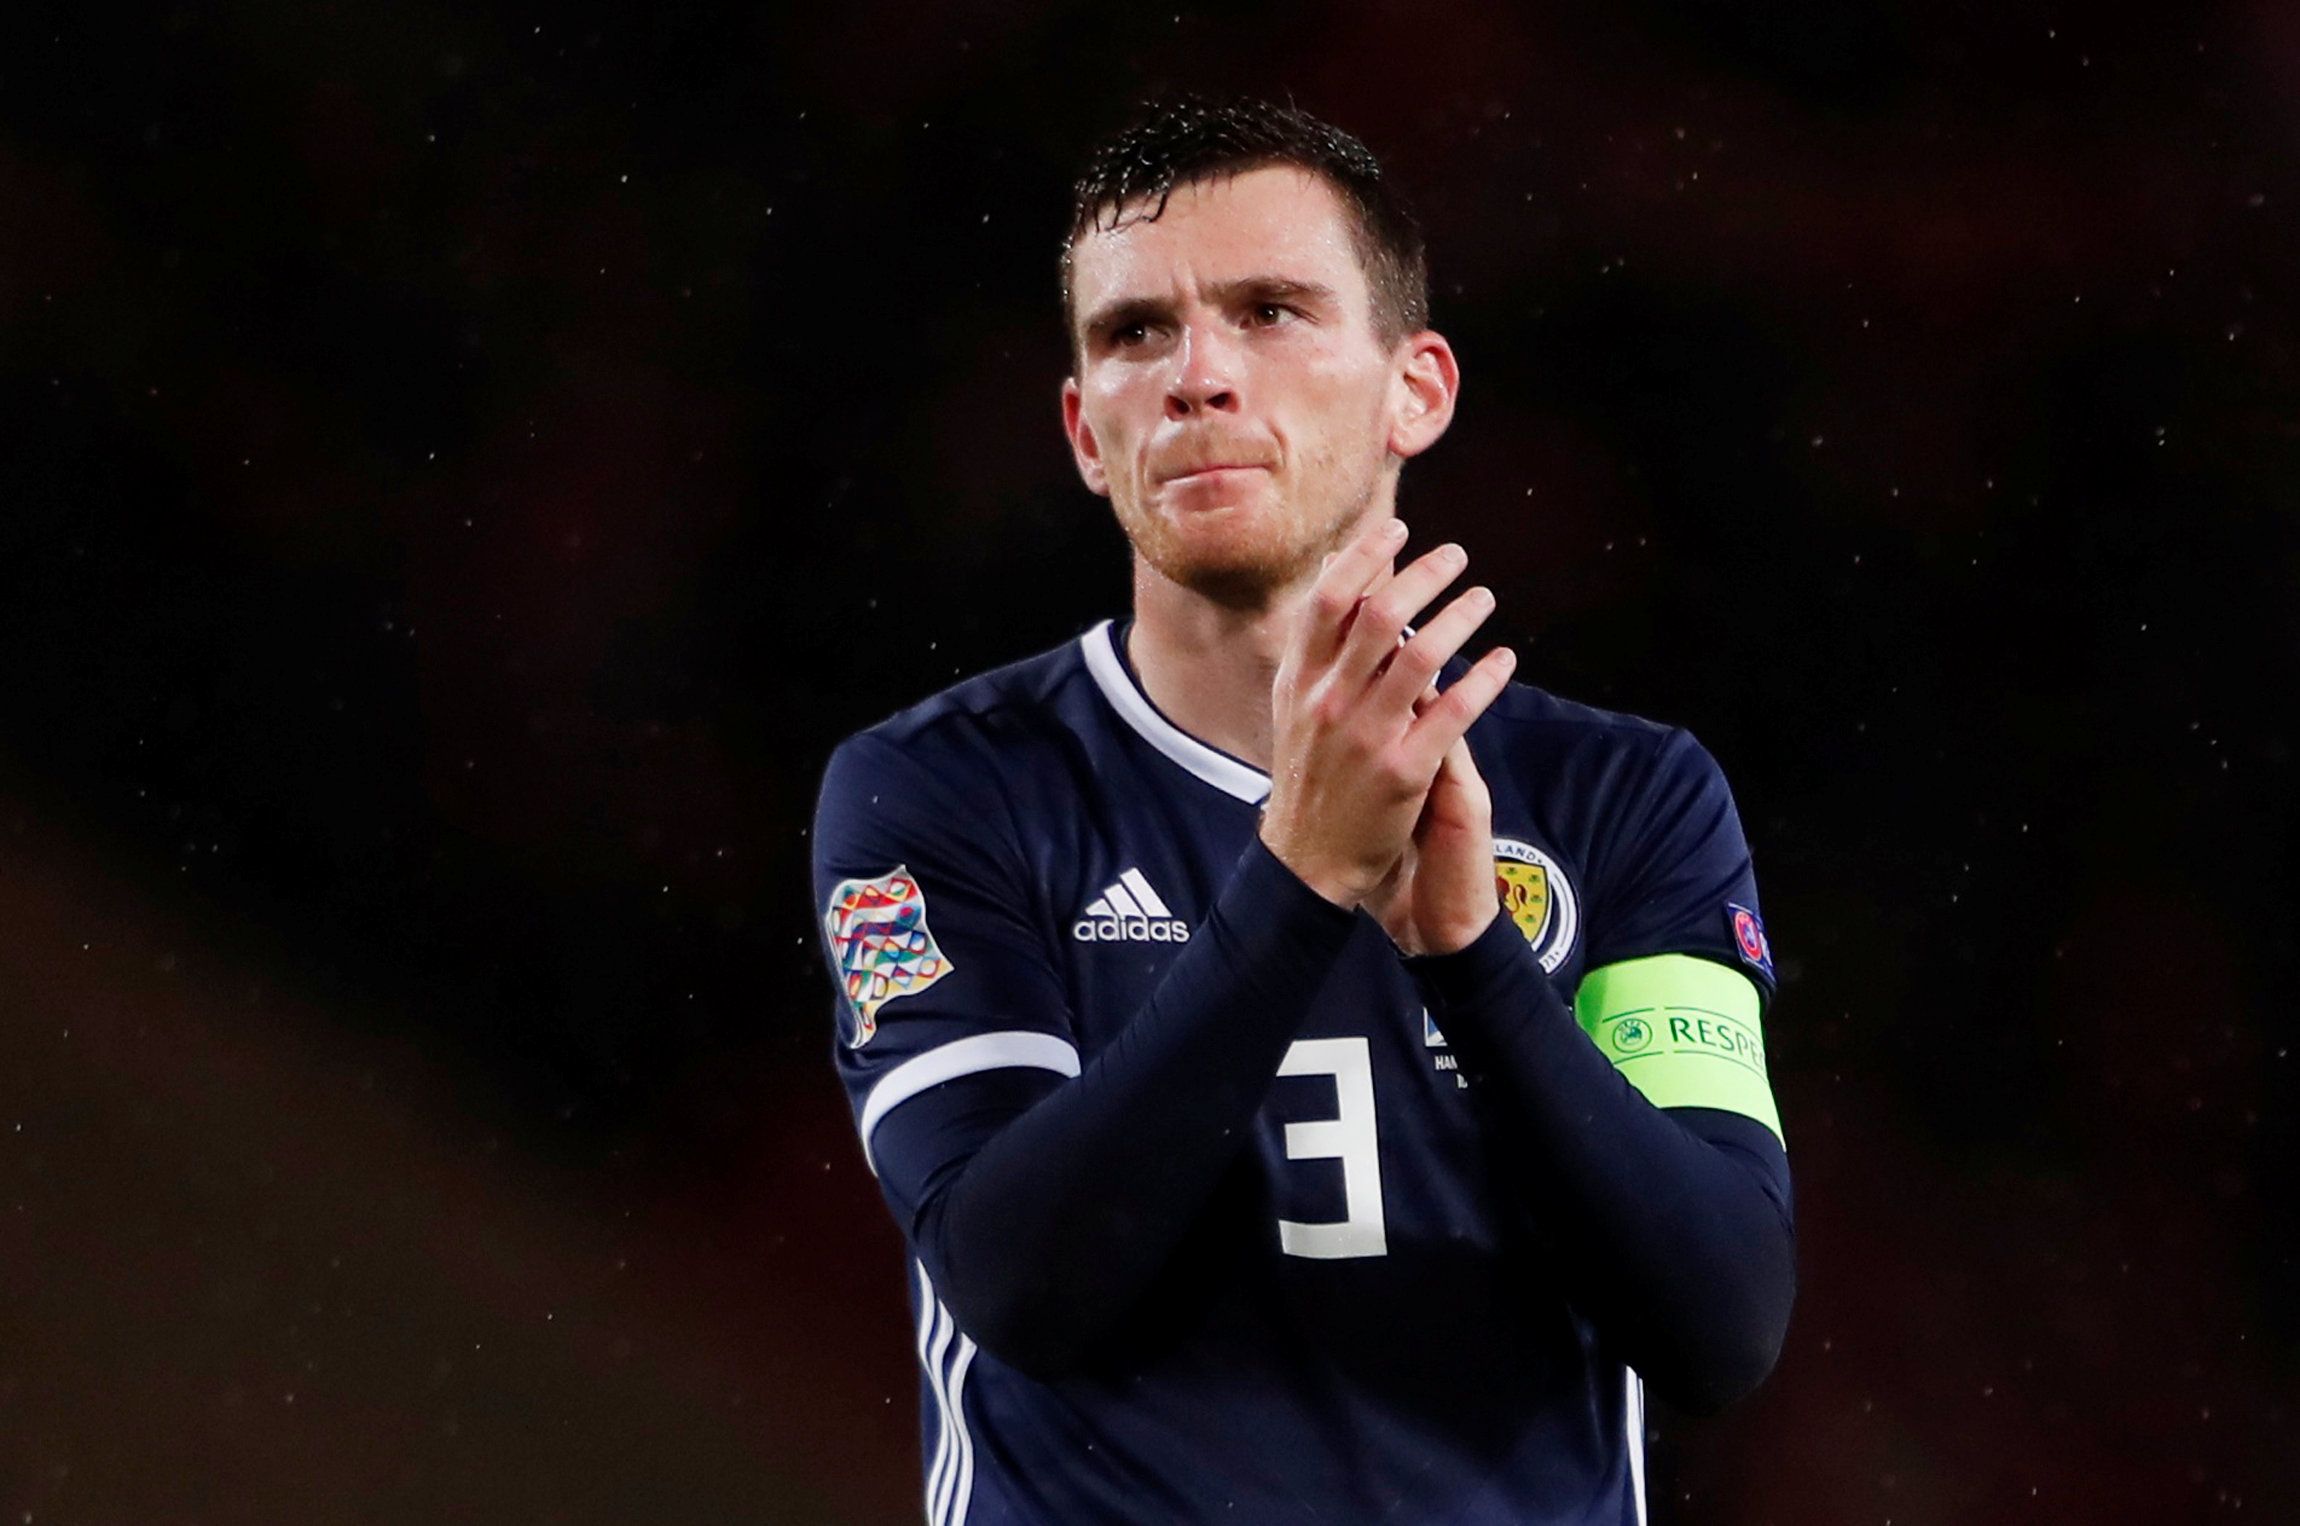 Soccer Football - UEFA Nations League - League C - Group 1 - Scotland v Albania - Hampden Park, Glasgow, Britain - September 10, 2018  Scotland's Andrew Robertson applauds during the match   Action Images via Reuters/Lee Smith